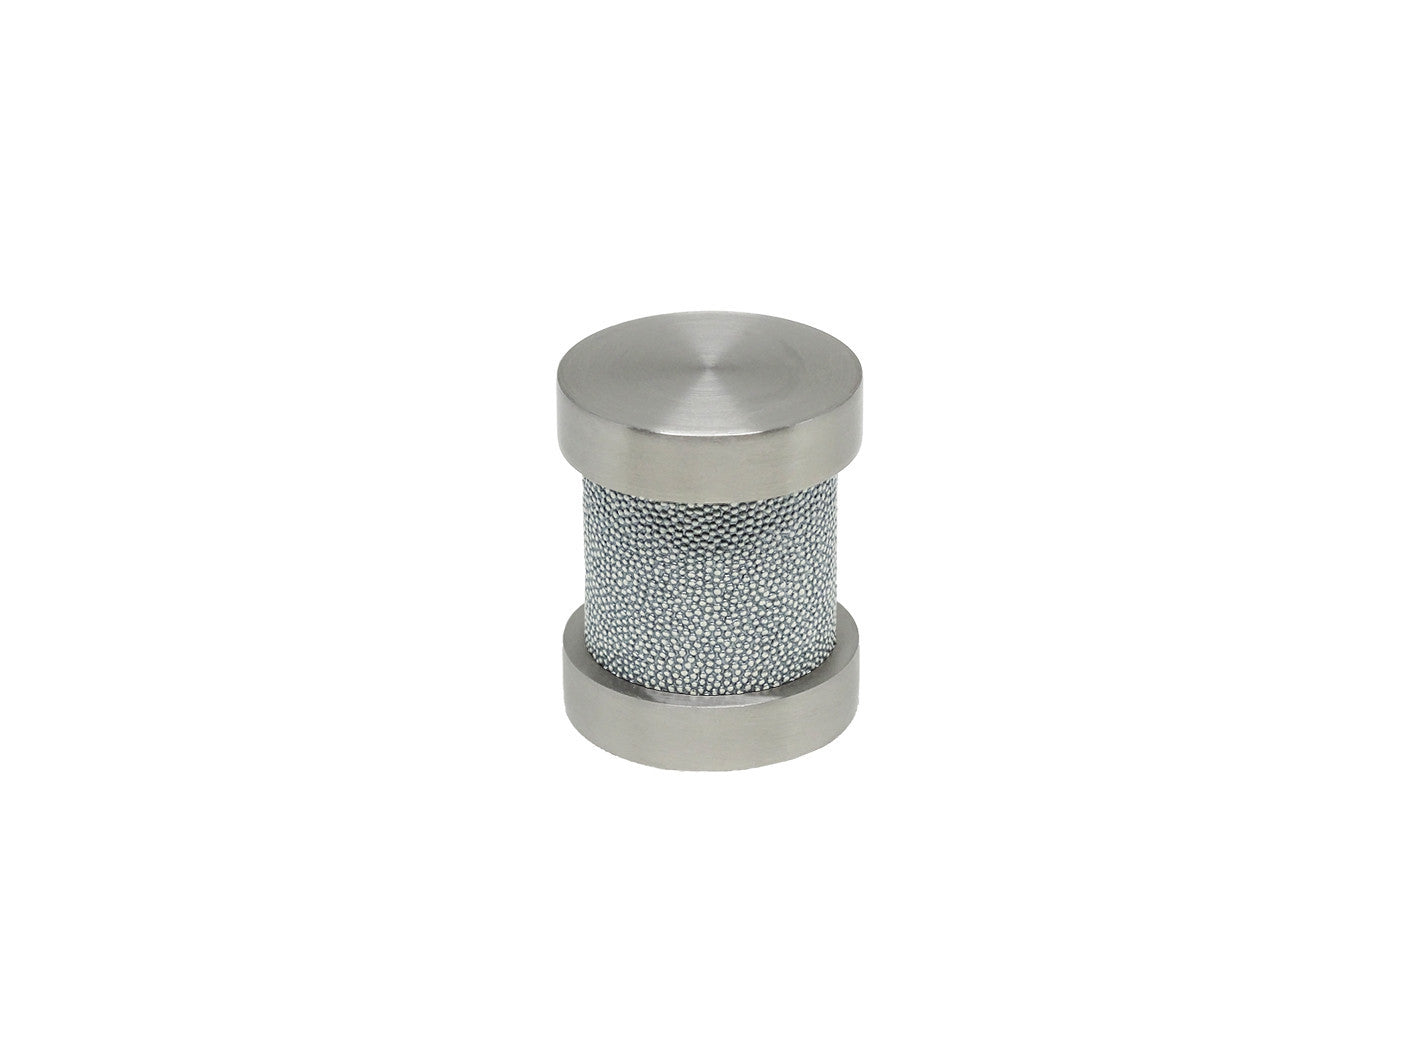 Moonlight blue groove finial | Walcot House 30mm stainless steel collection